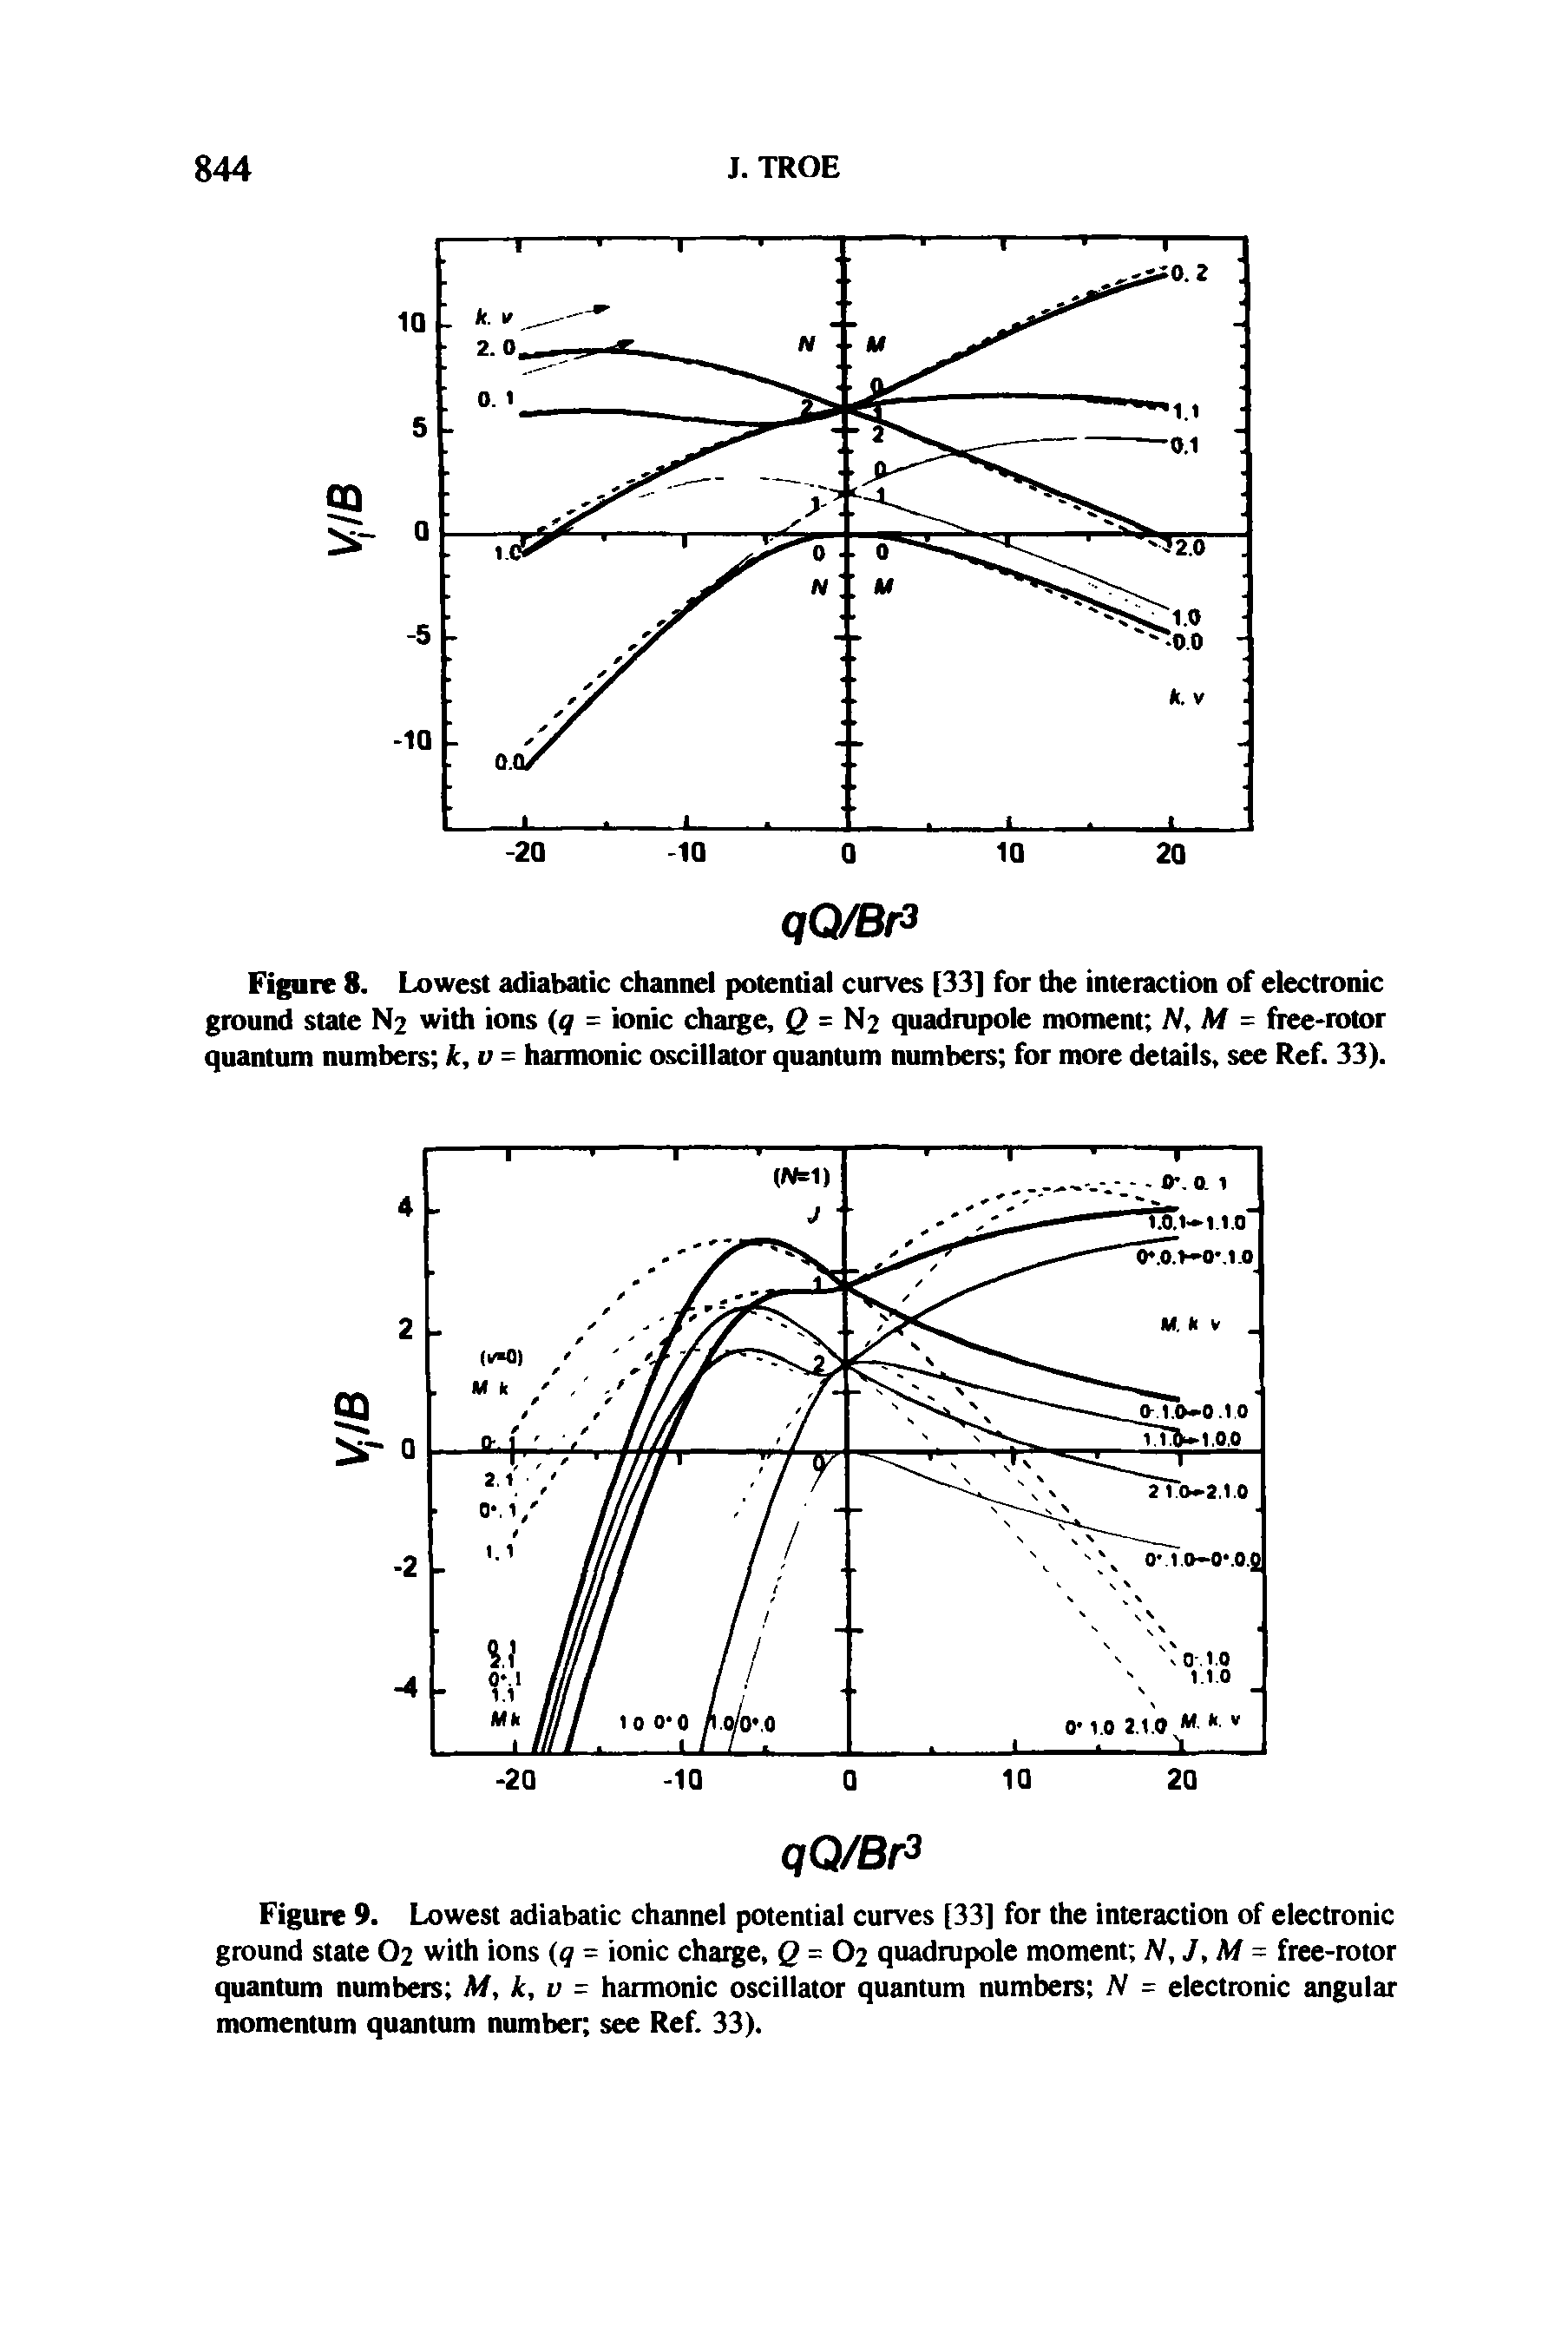 Figure 9. Lowest adiabatic channel potential curves [33] for the interaction of electronic ground state O2 with ions (q = ionic charge, Q = O2 quadrupole moment N,J,M= free-rotor quantum numbers M, k, v = harmonic oscillator quantum numbers N = electronic angular momentum quantum number see Ref. 33).